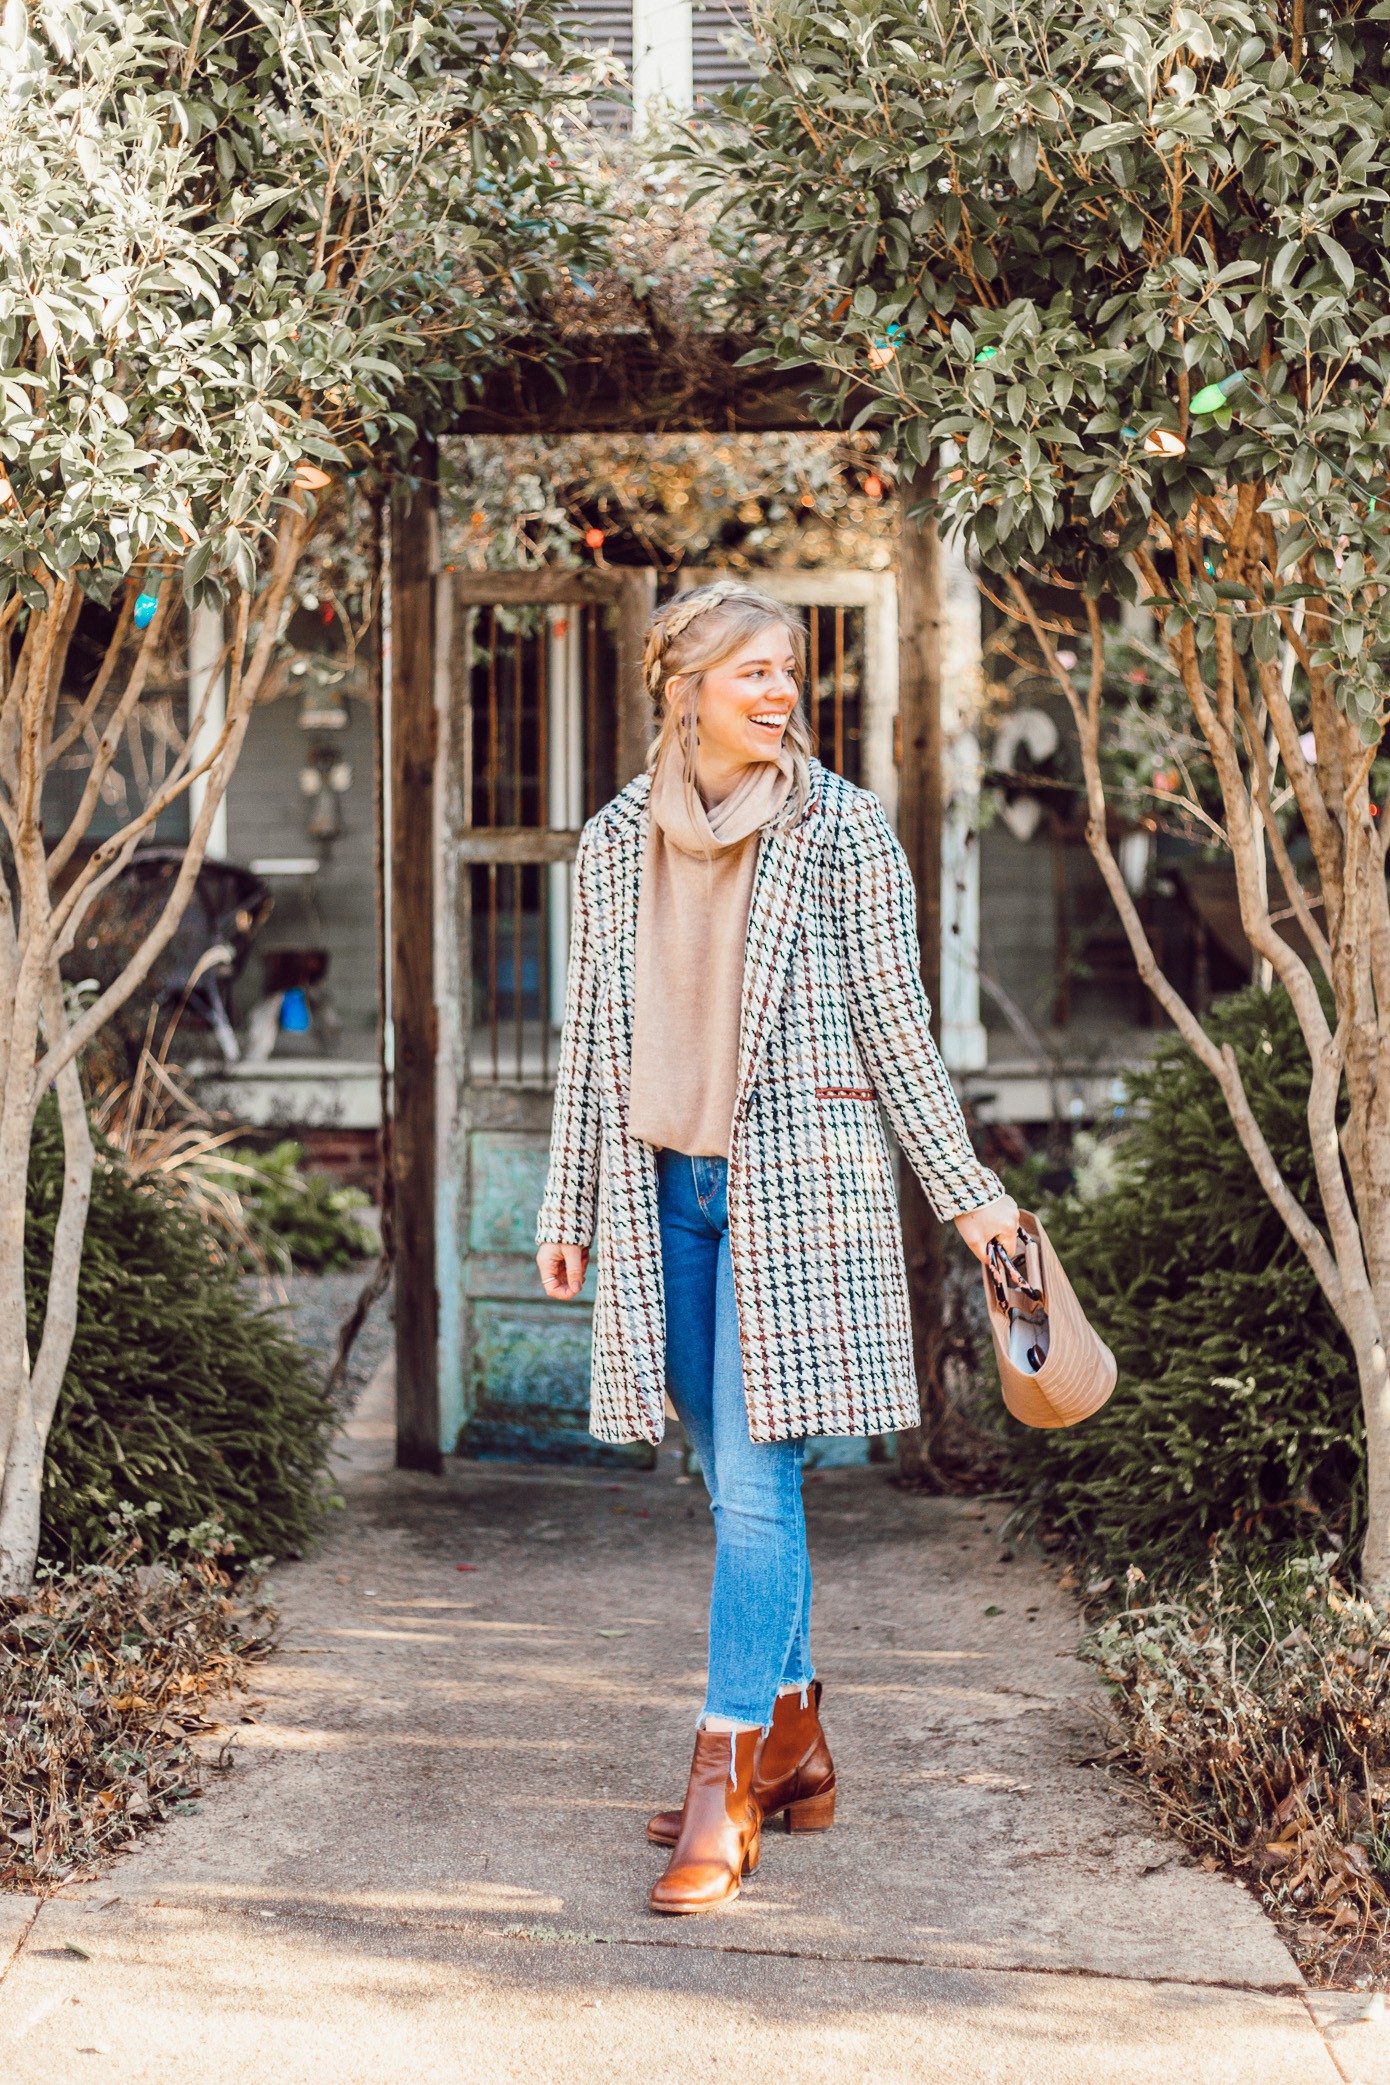 The Importance of a Great Winter Coat | Houndstooth Coat, Preppy Winter Style | Louella Reese